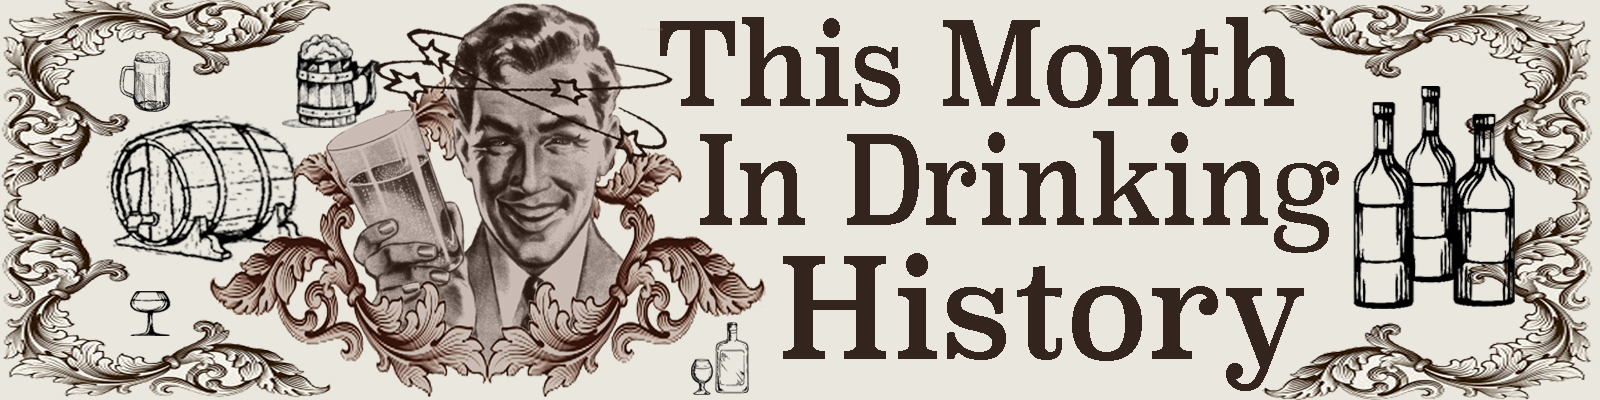 This Month In Drinking History